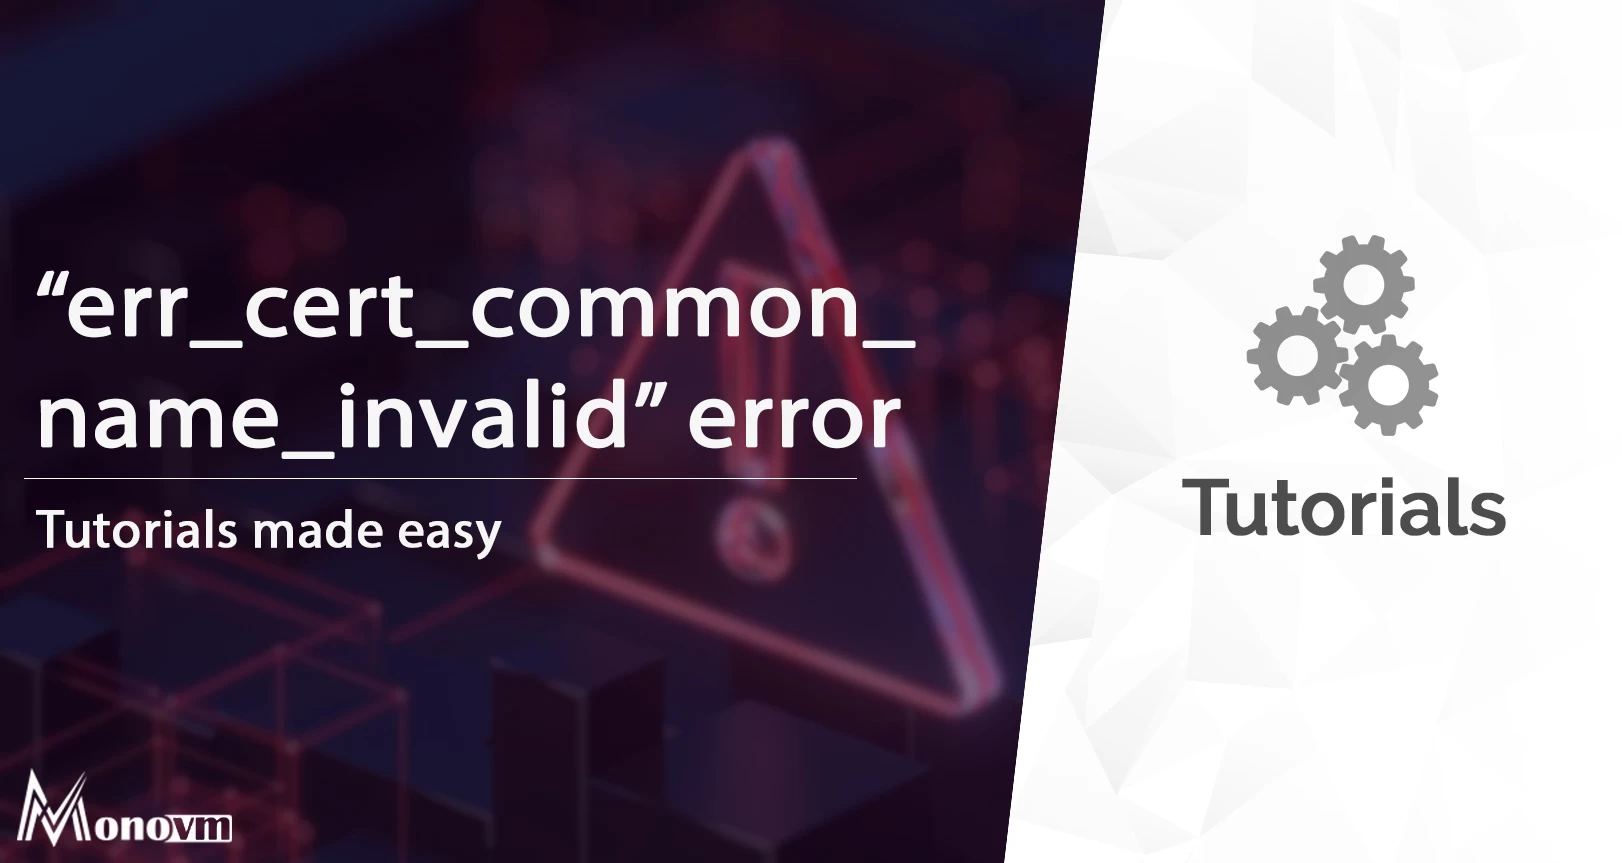 What is err_cert_common_name_invalid and how to fix it?